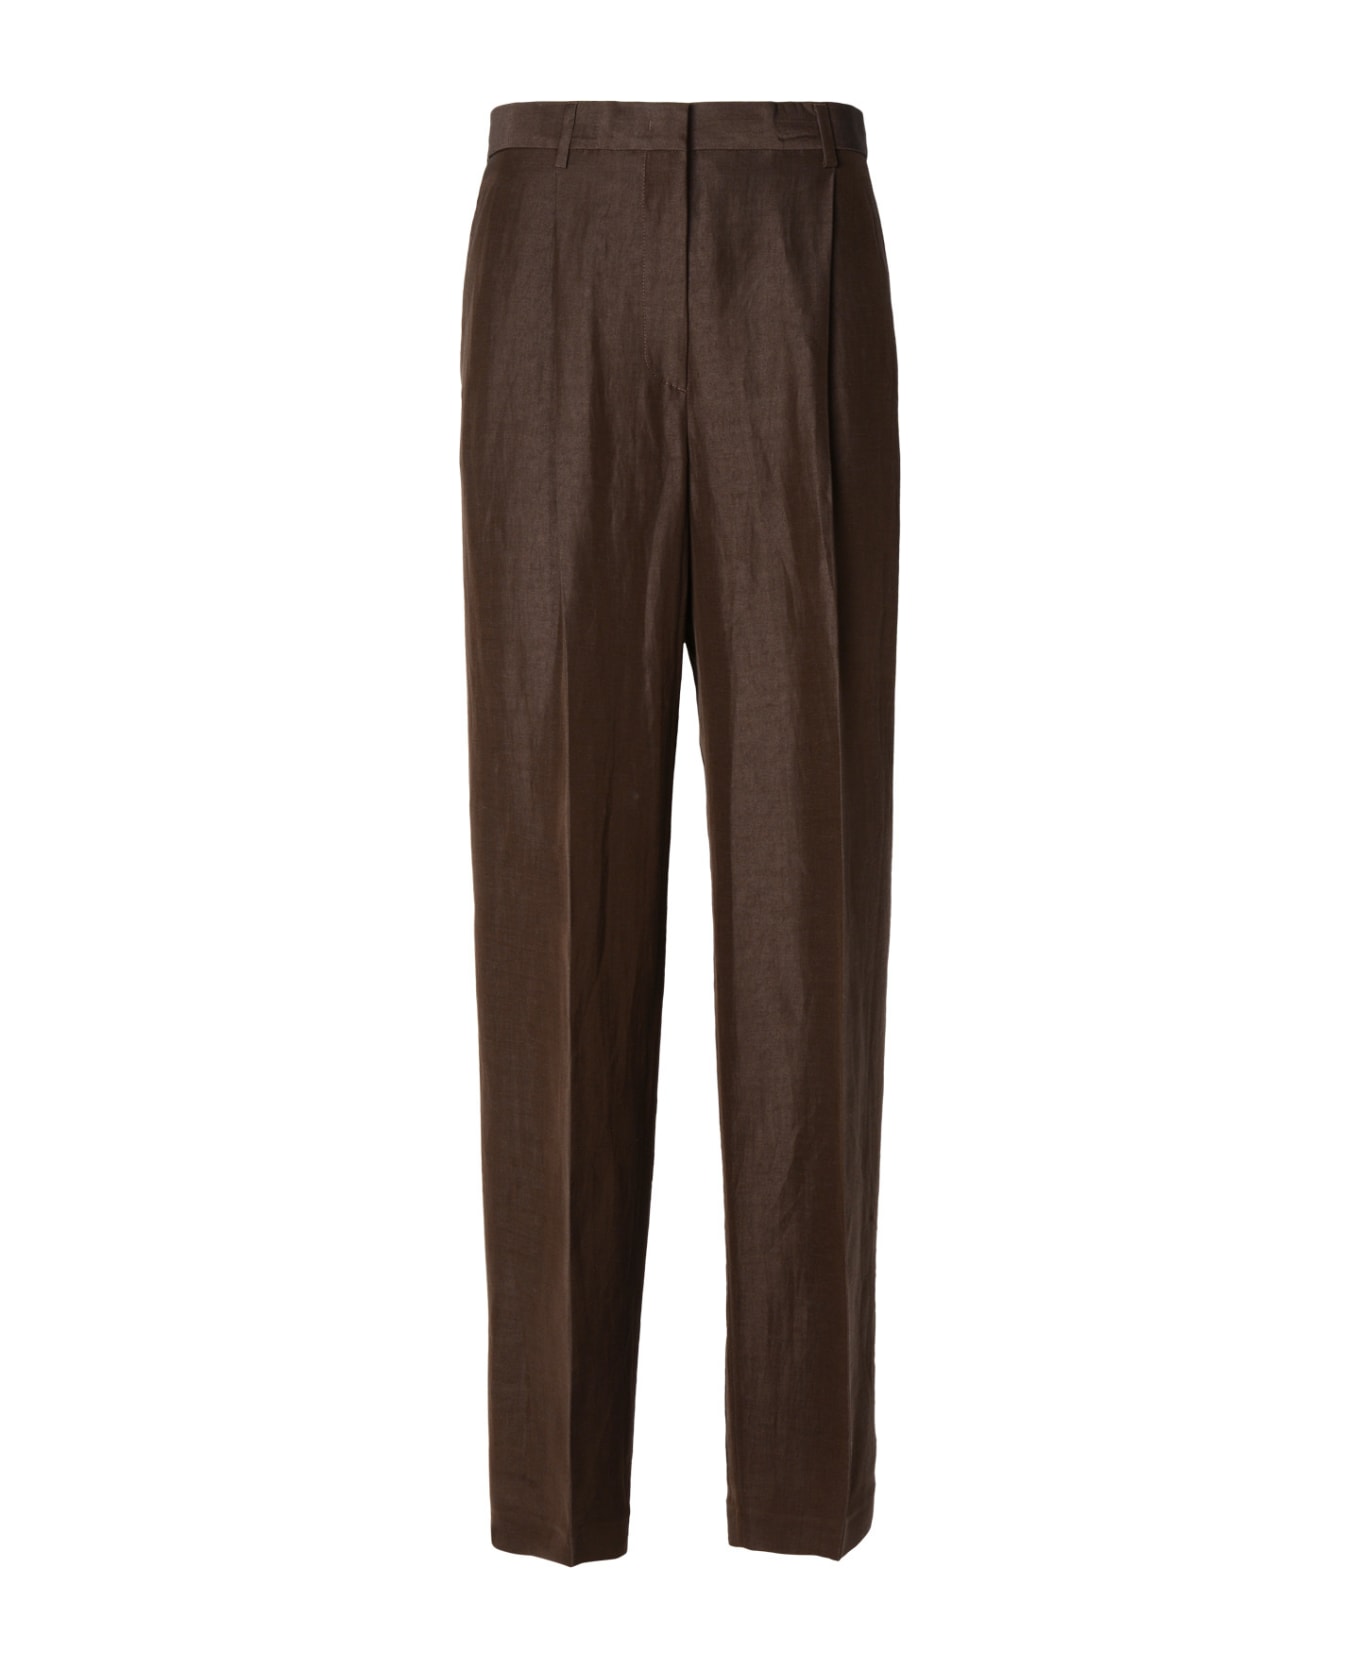 MSGM Brown Linen Blend Trousers - Brown